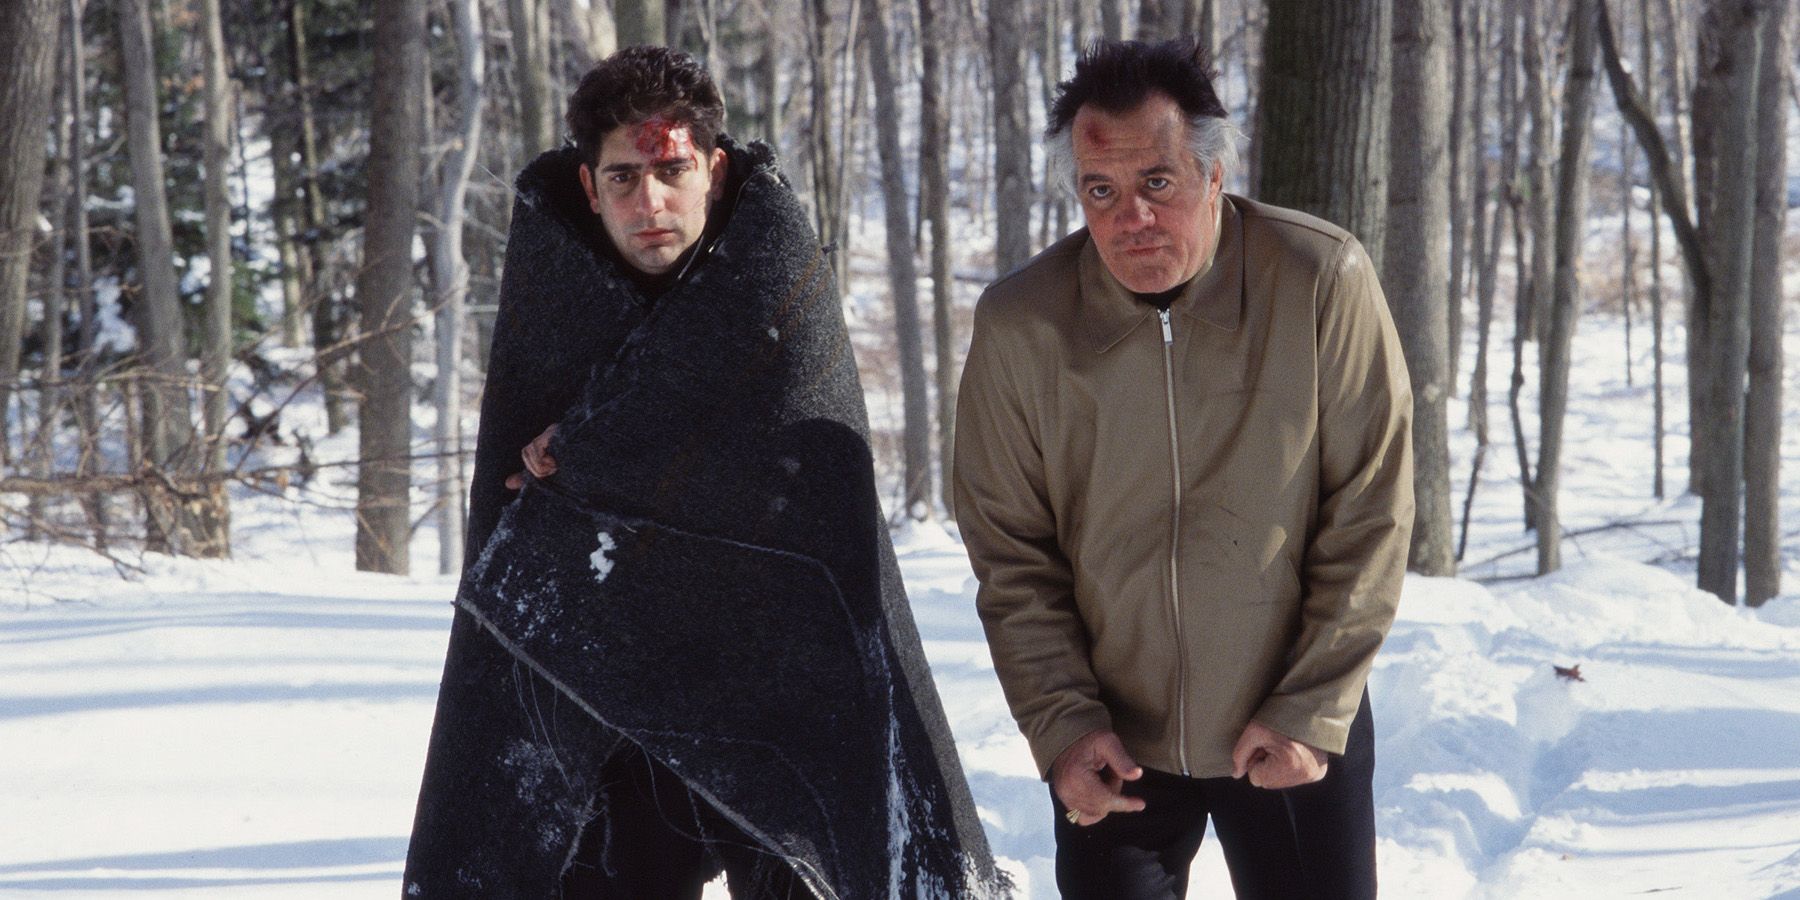 Christopher and Paulie injured in the snowy forest in The Sopranos